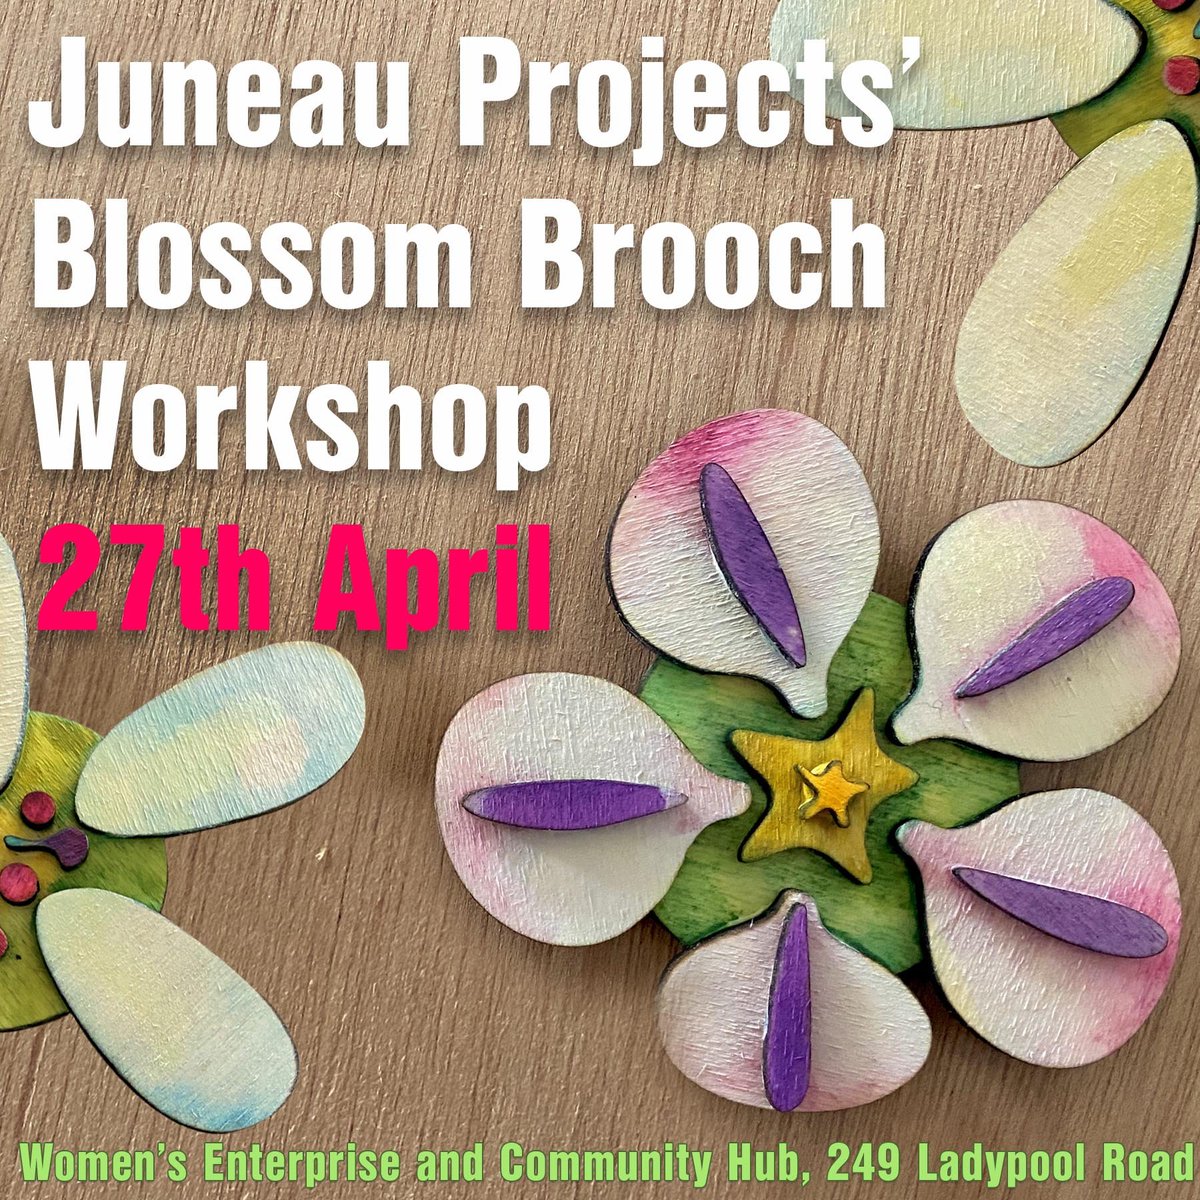 Psst - there's still a couple of spaces left for @juneauprojects Blossom Brooch 1:15pm workshop at the Blossom Branch tomorrow 🤩 Fill in the booking form and we'll let you know when your space is confirmed: forms.office.com/e/xMRWCe97hr 📍 Blossom Branch, 249a Ladypool Road, B12 8LF